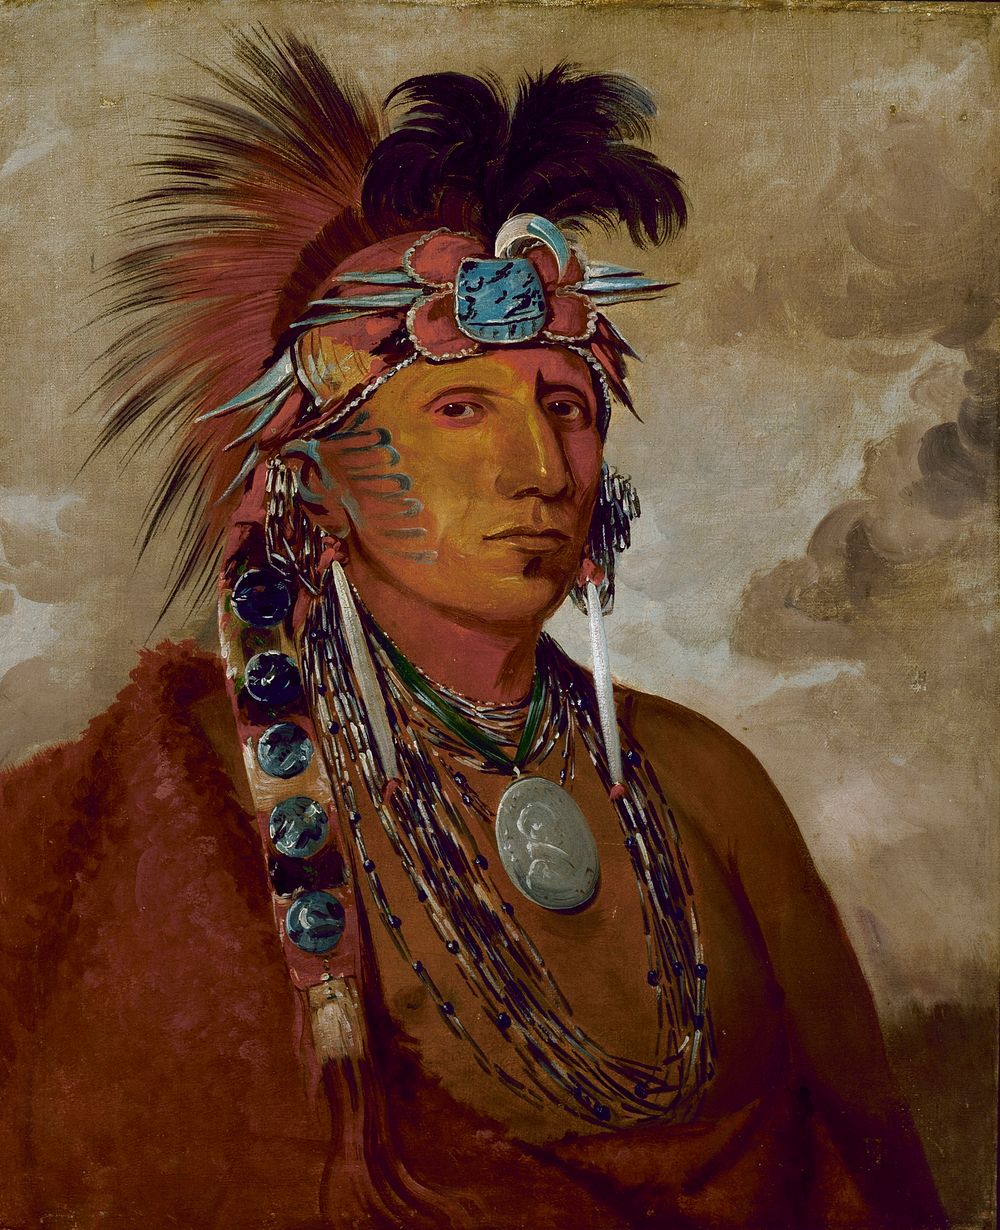 Sh&oacute;-me-k&oacute;s-see, The Wolf, a Chief (1832) painting in high resolution by George Catlin.  